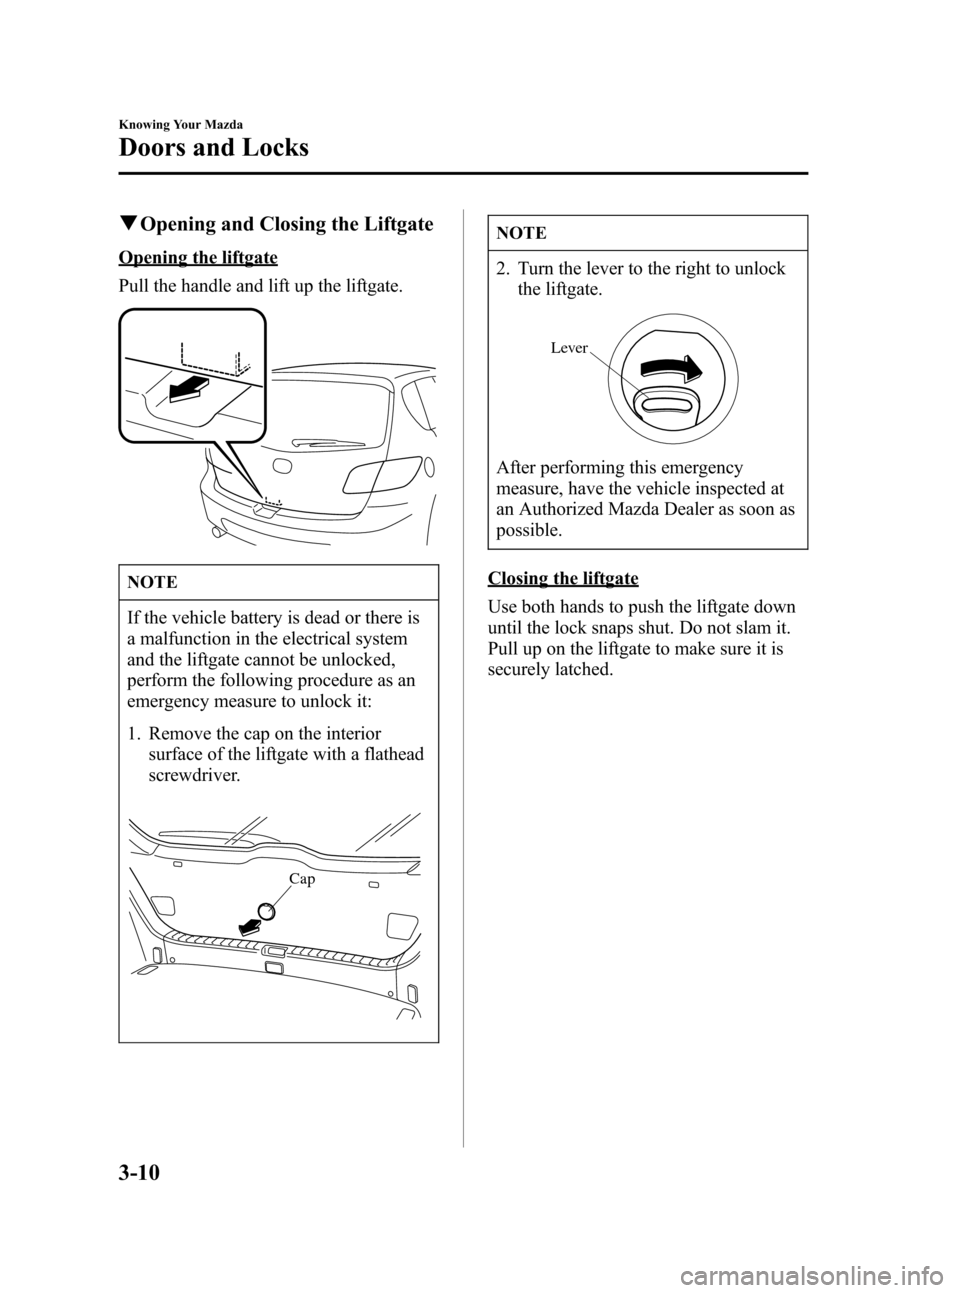 MAZDA MODEL 3 HATCHBACK 2006   (in English) Manual PDF Black plate (80,1)
qOpening and Closing the Liftgate
Opening the liftgate
Pull the handle and lift up the liftgate.
NOTE
If the vehicle battery is dead or there is
a malfunction in the electrical syst